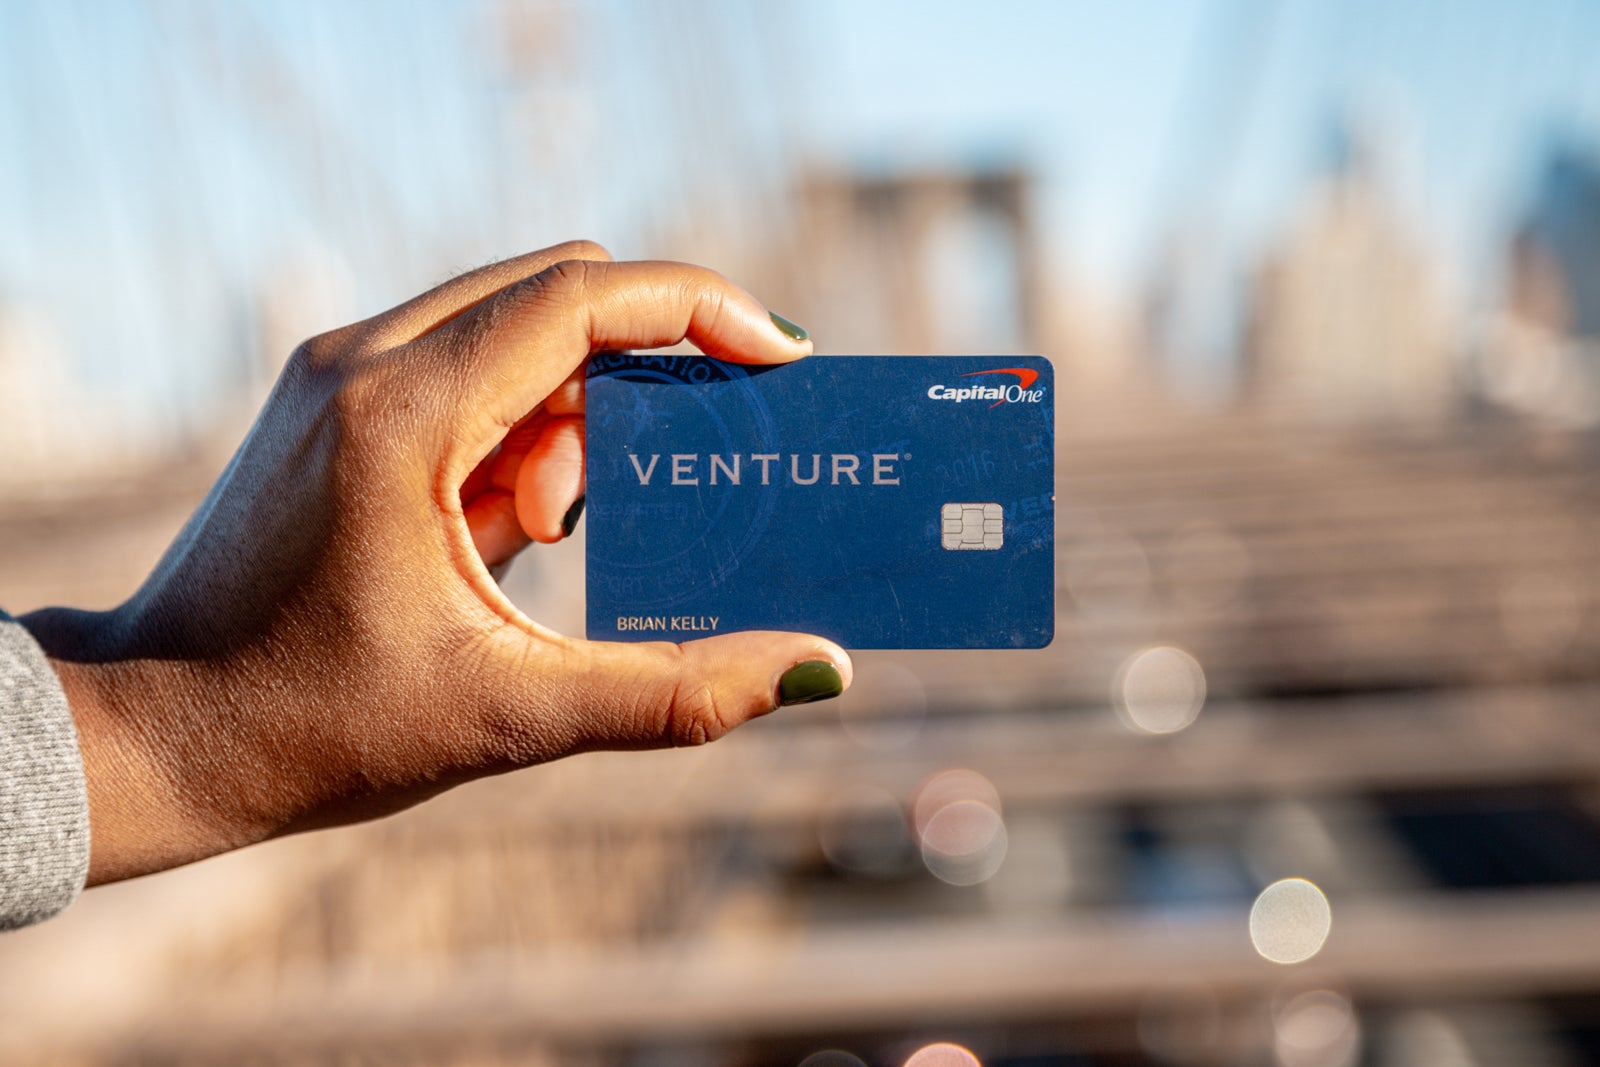 Capital One Venture current offer